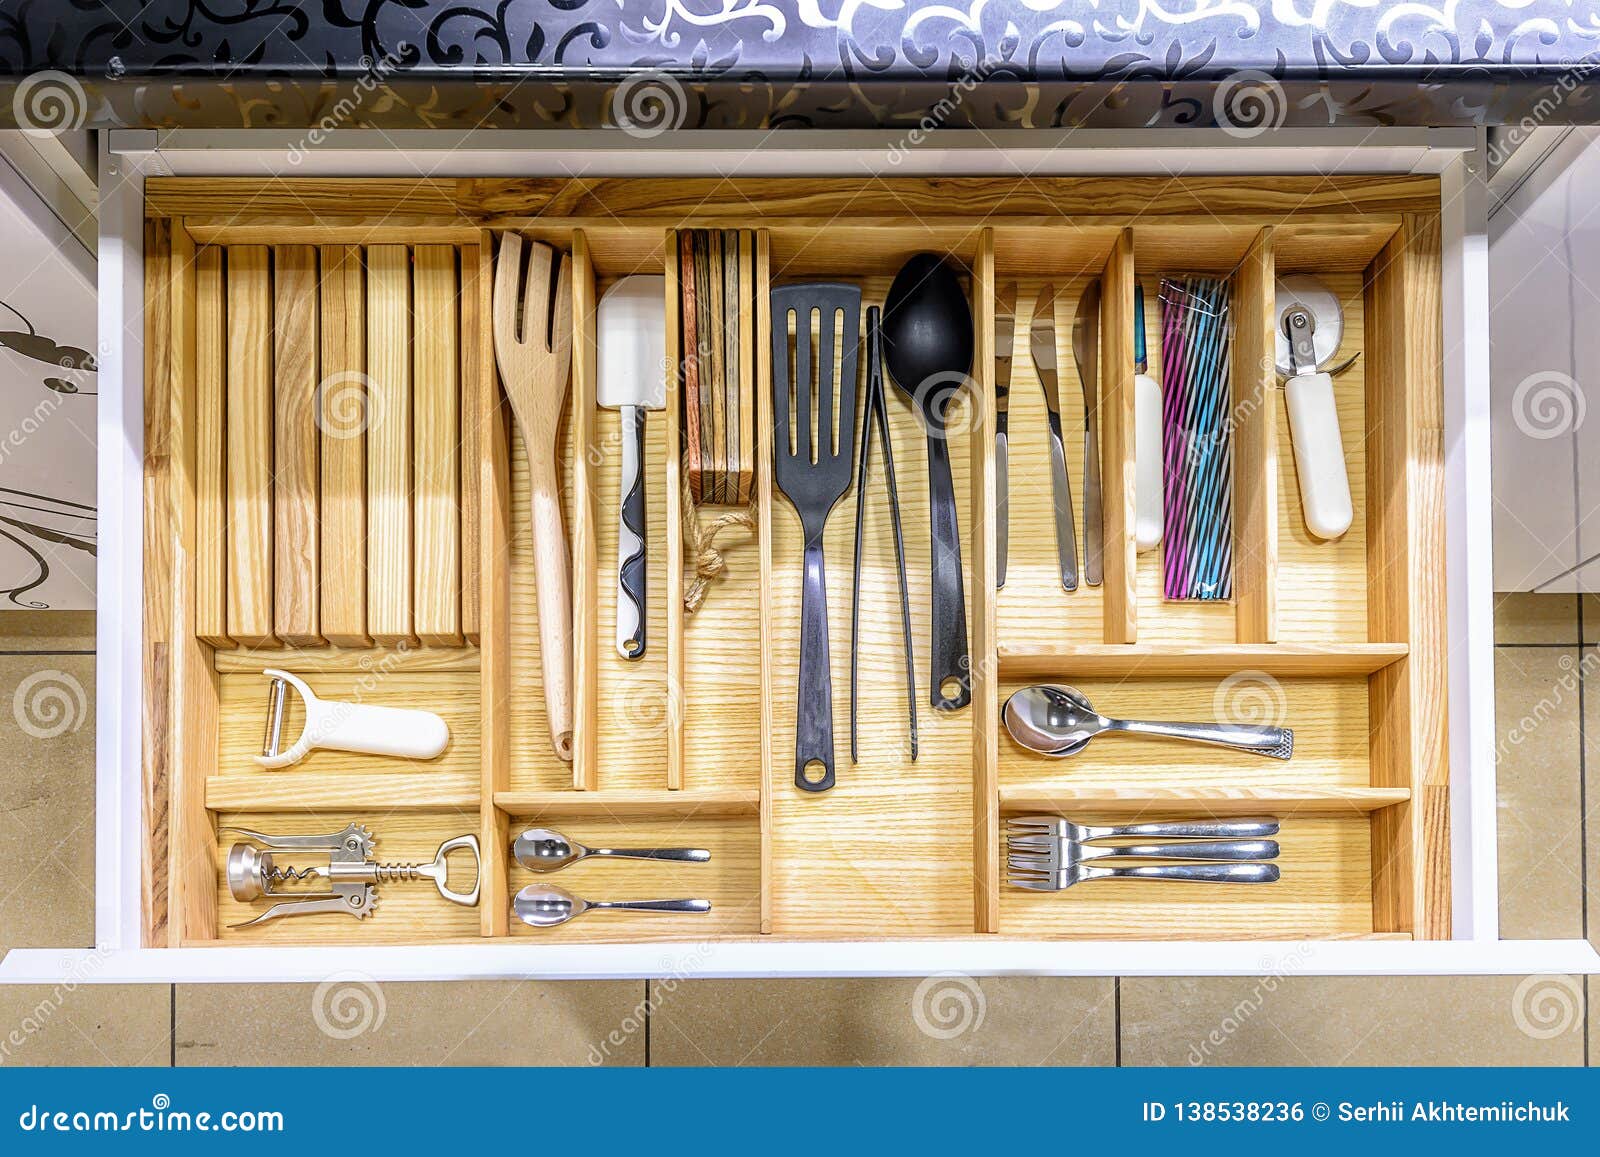 opened kitchen drawer , a smart solution for kitchen storage and organizing